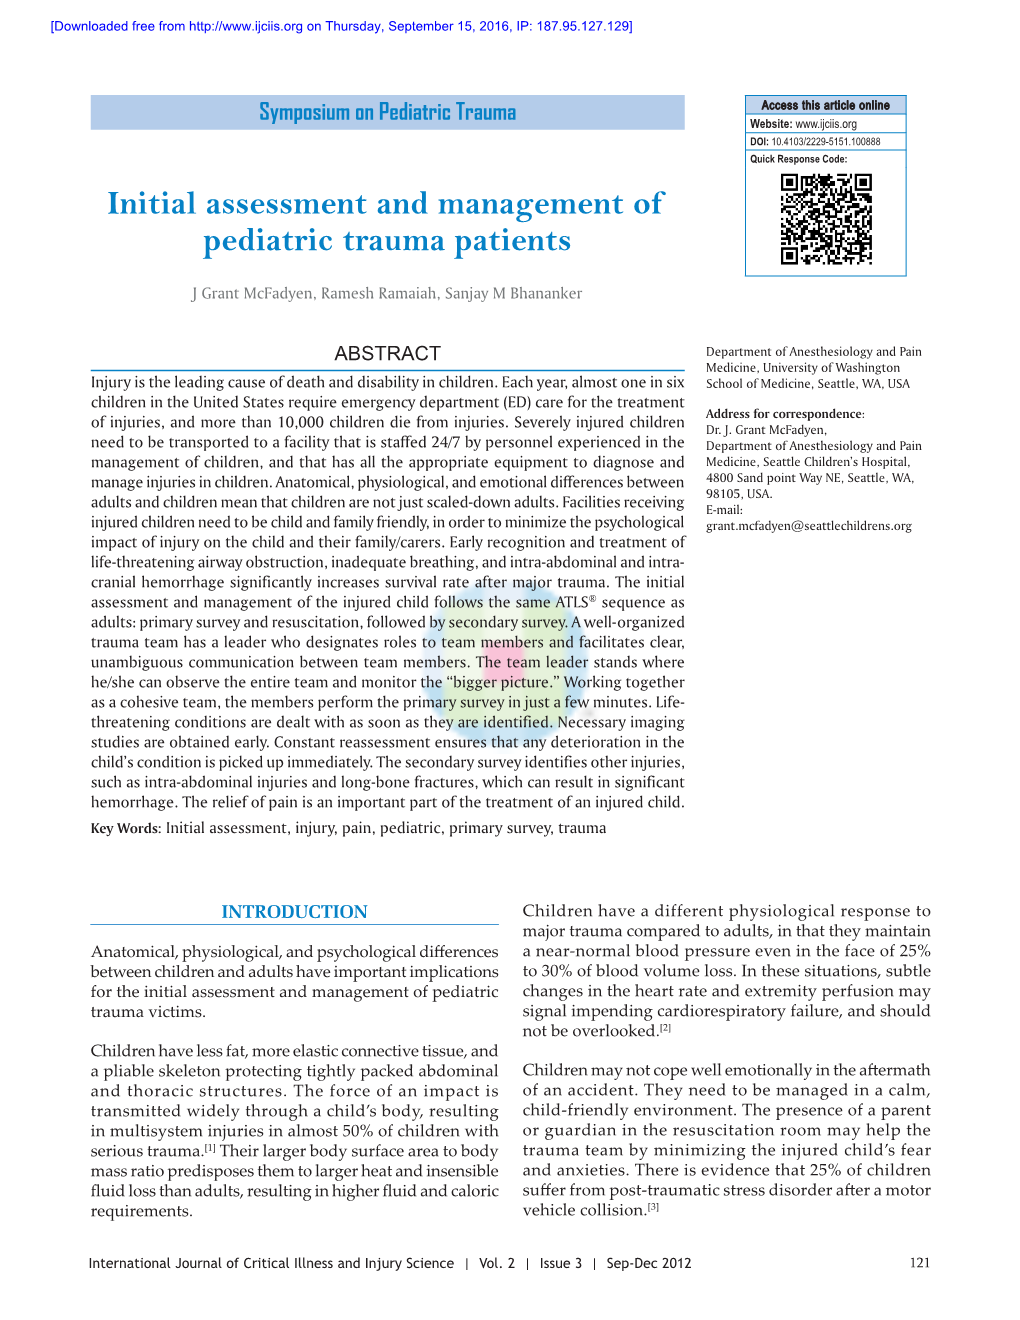 Initial Assessment and Management of Pediatric Trauma Patients